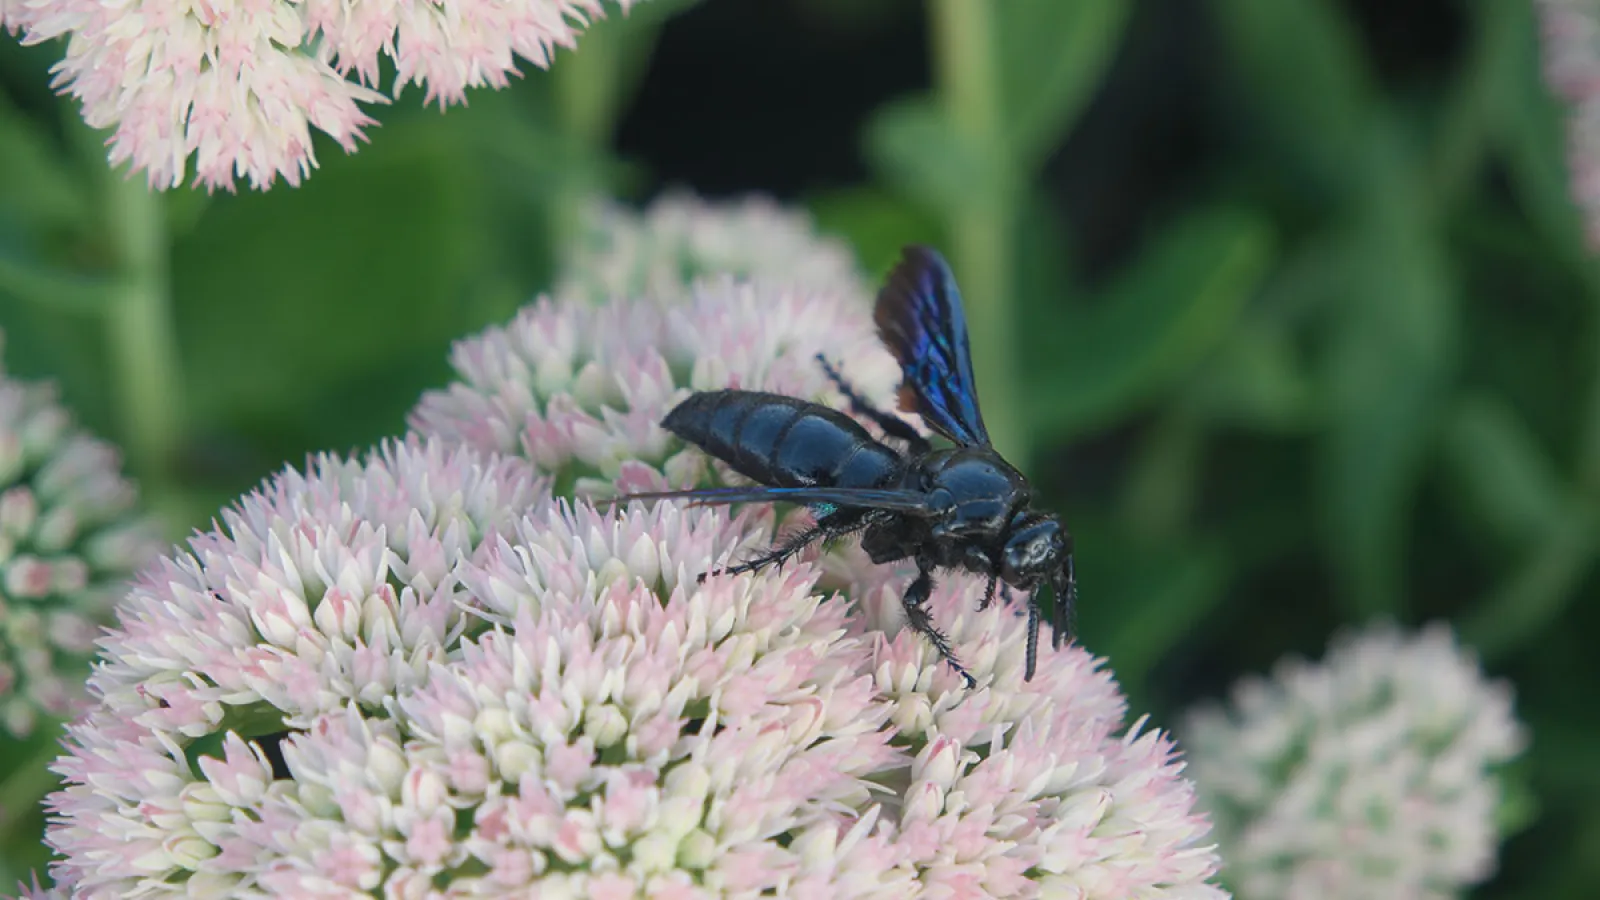 a blue and black insect on a flower